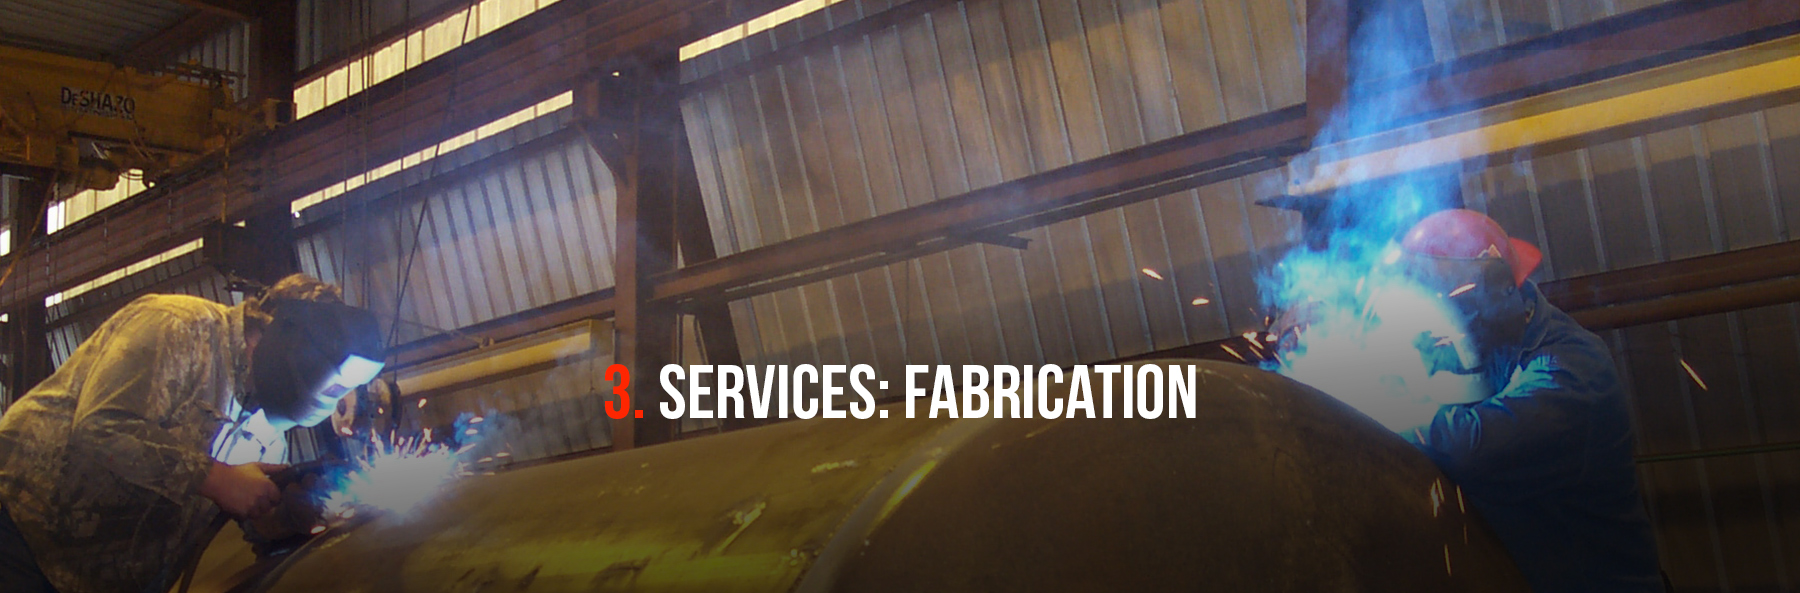 Services: Fabrication